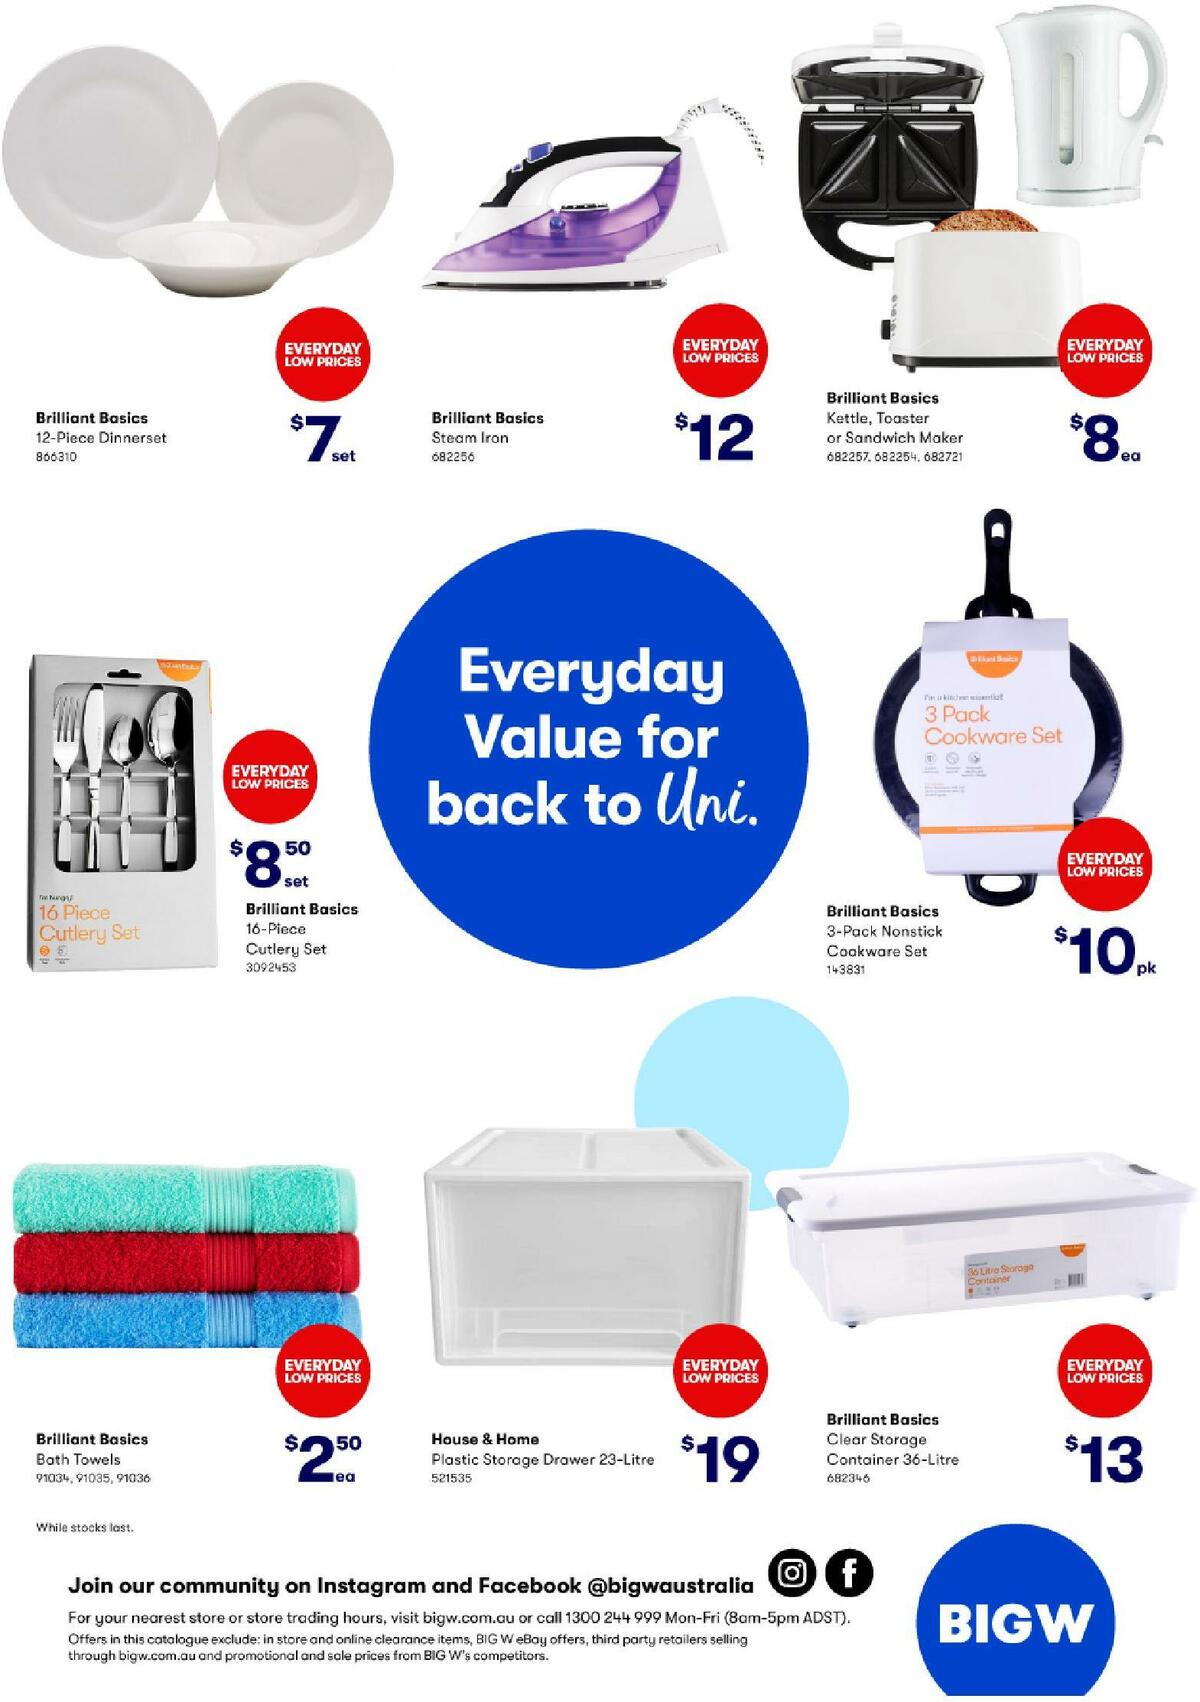 Big W Catalogues from 13 January